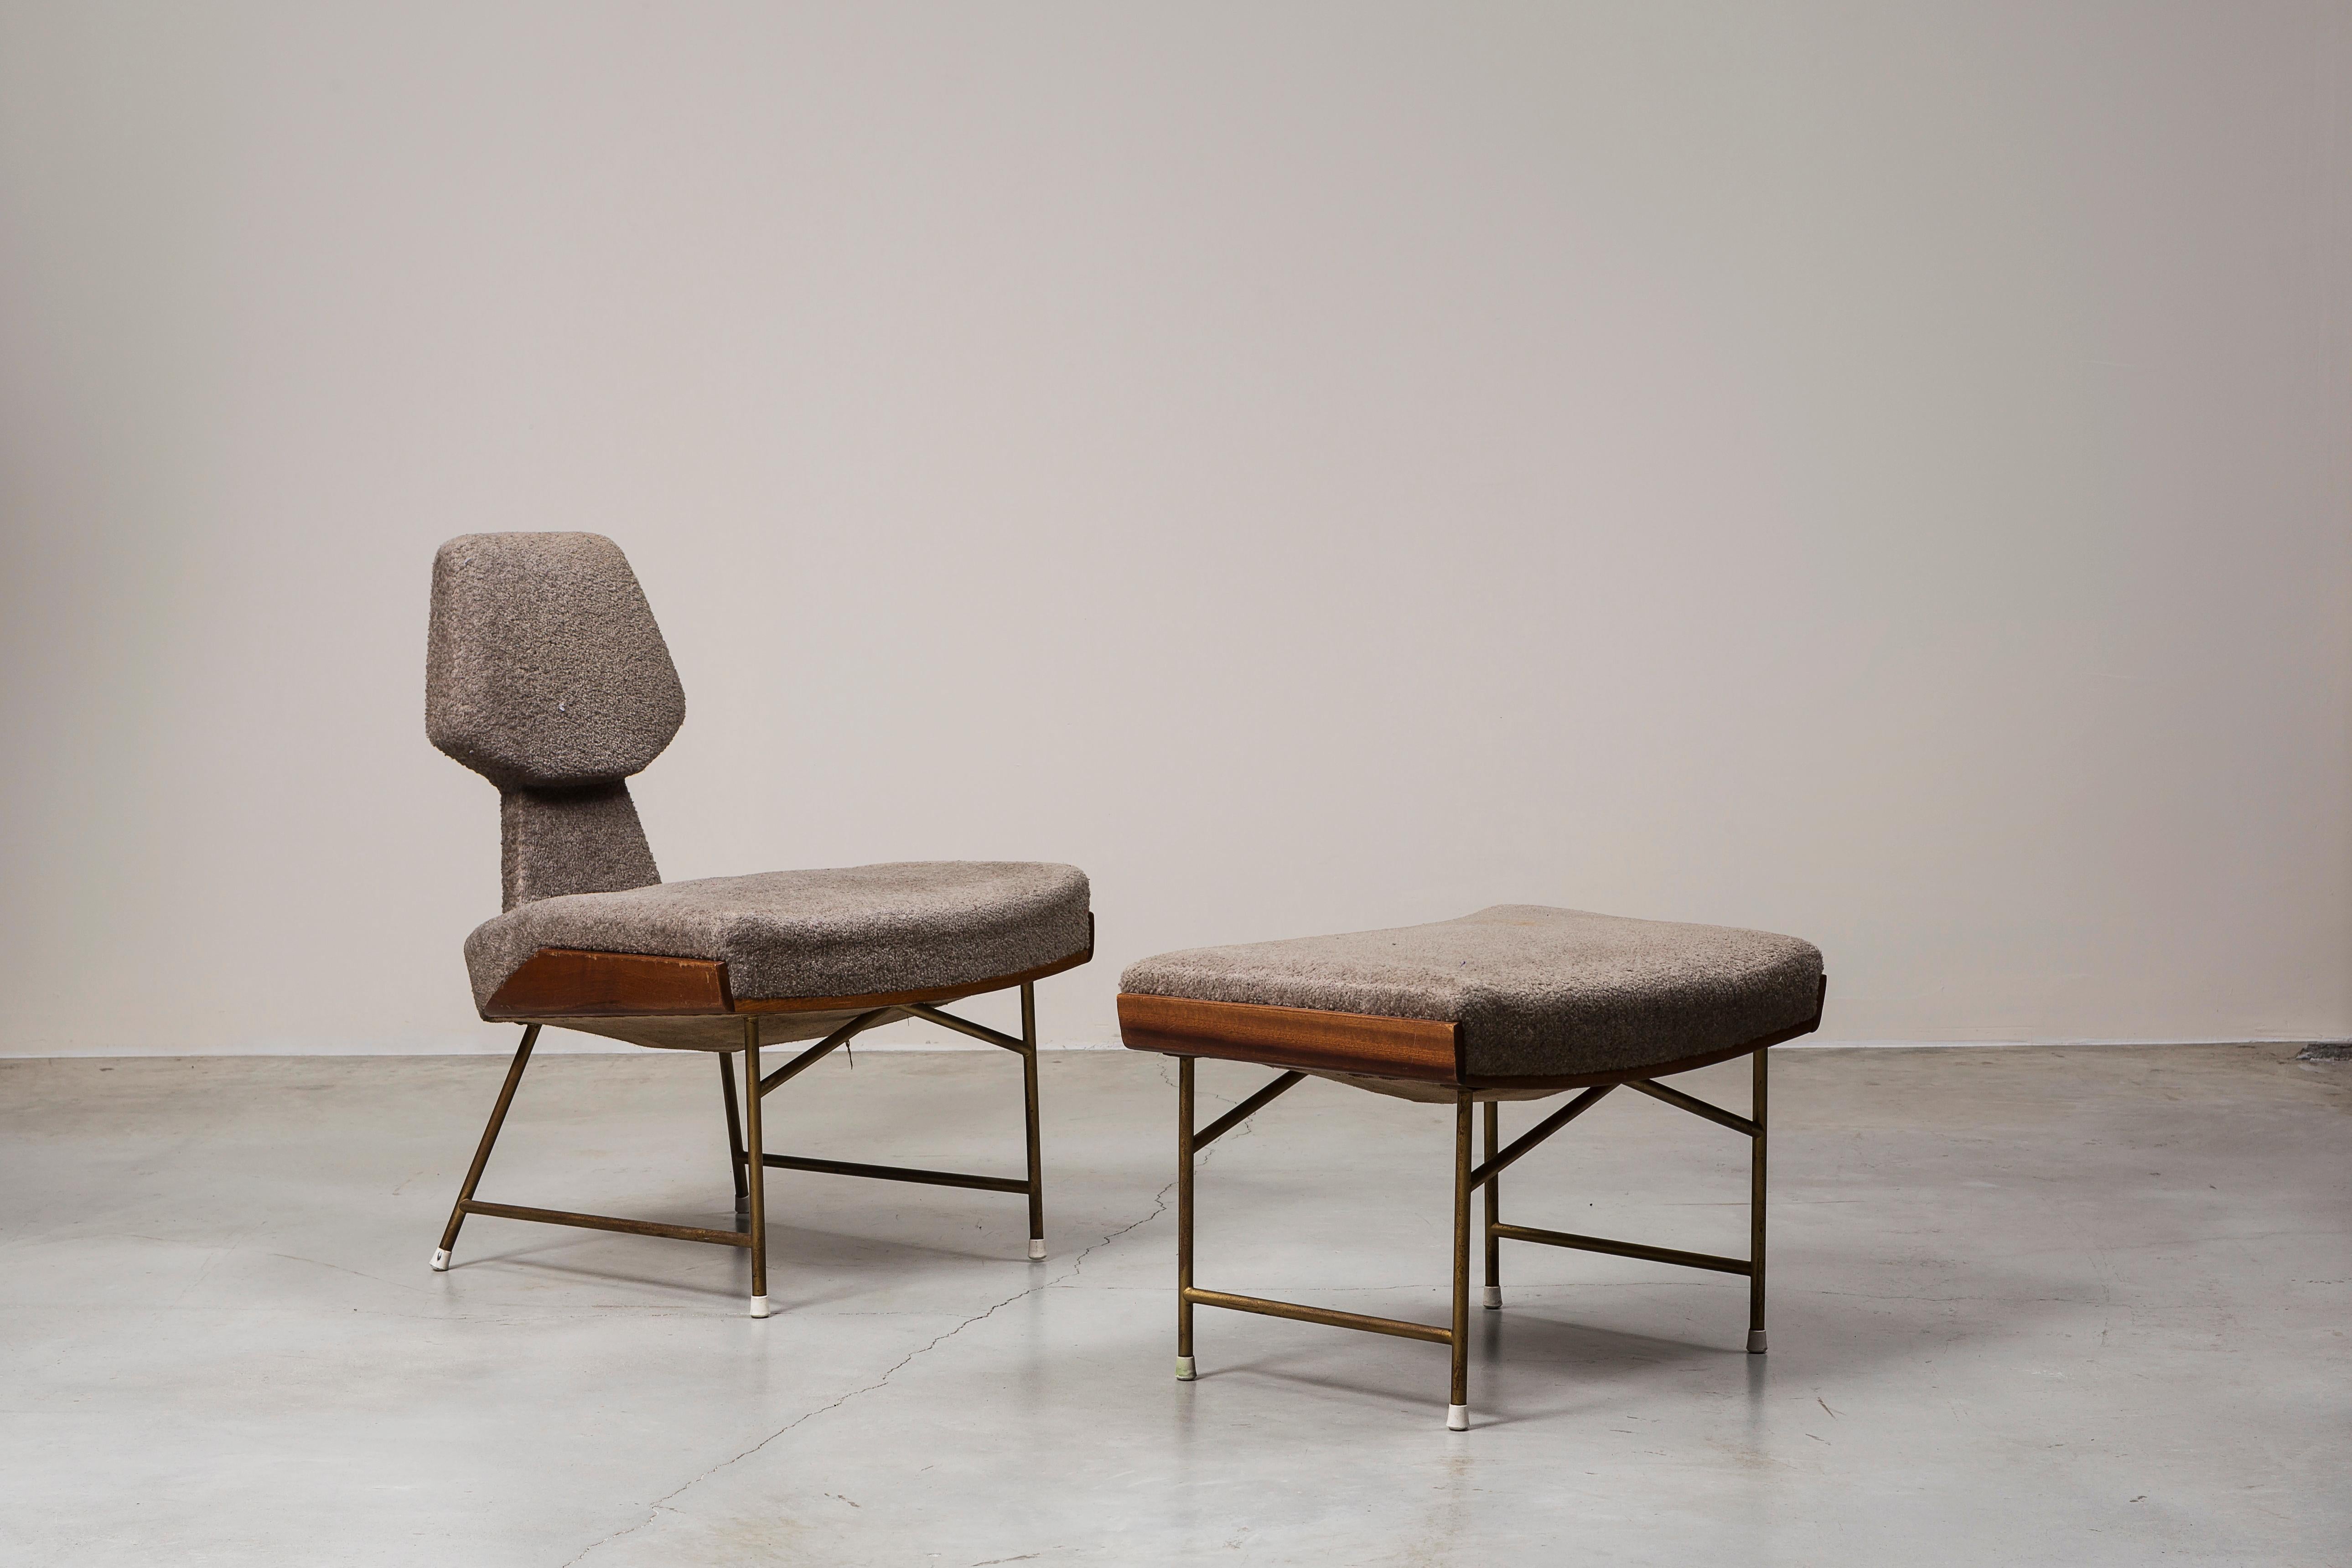 Pair of lounge chairs and one ottoman by Renzo Zavanella
Italy, 1950s. Examples provided with certificate of authenticity. Structure in Anticorodal aluminum, brass, fabric upholstery. Measures: Chair 53 x 65 x H 80 cm (20.8 x 25.5 x H 31.4 in).